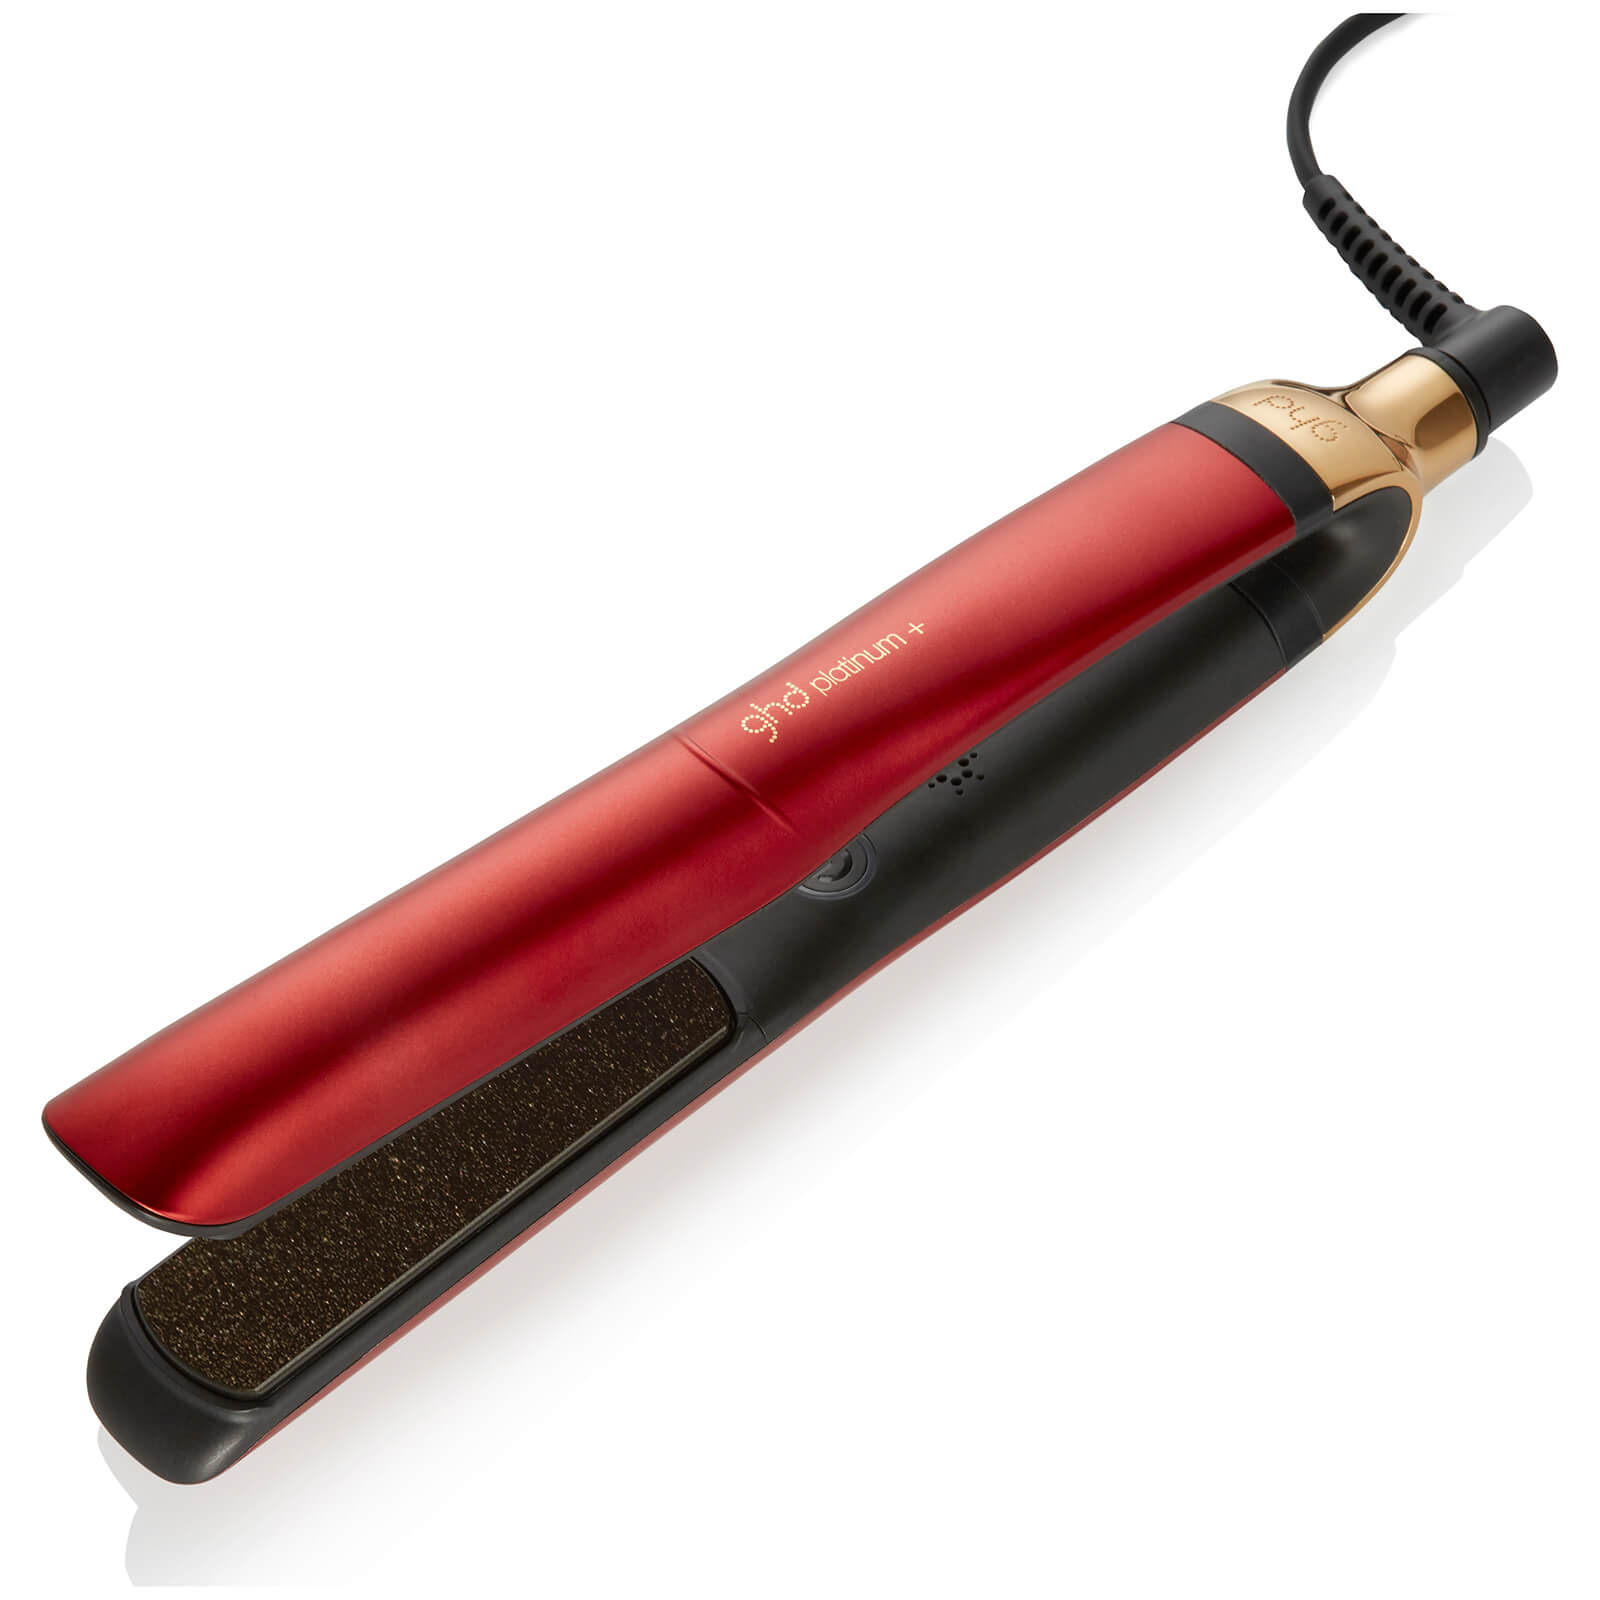 ghd valentines day gift platinum+ scarlet limited edition